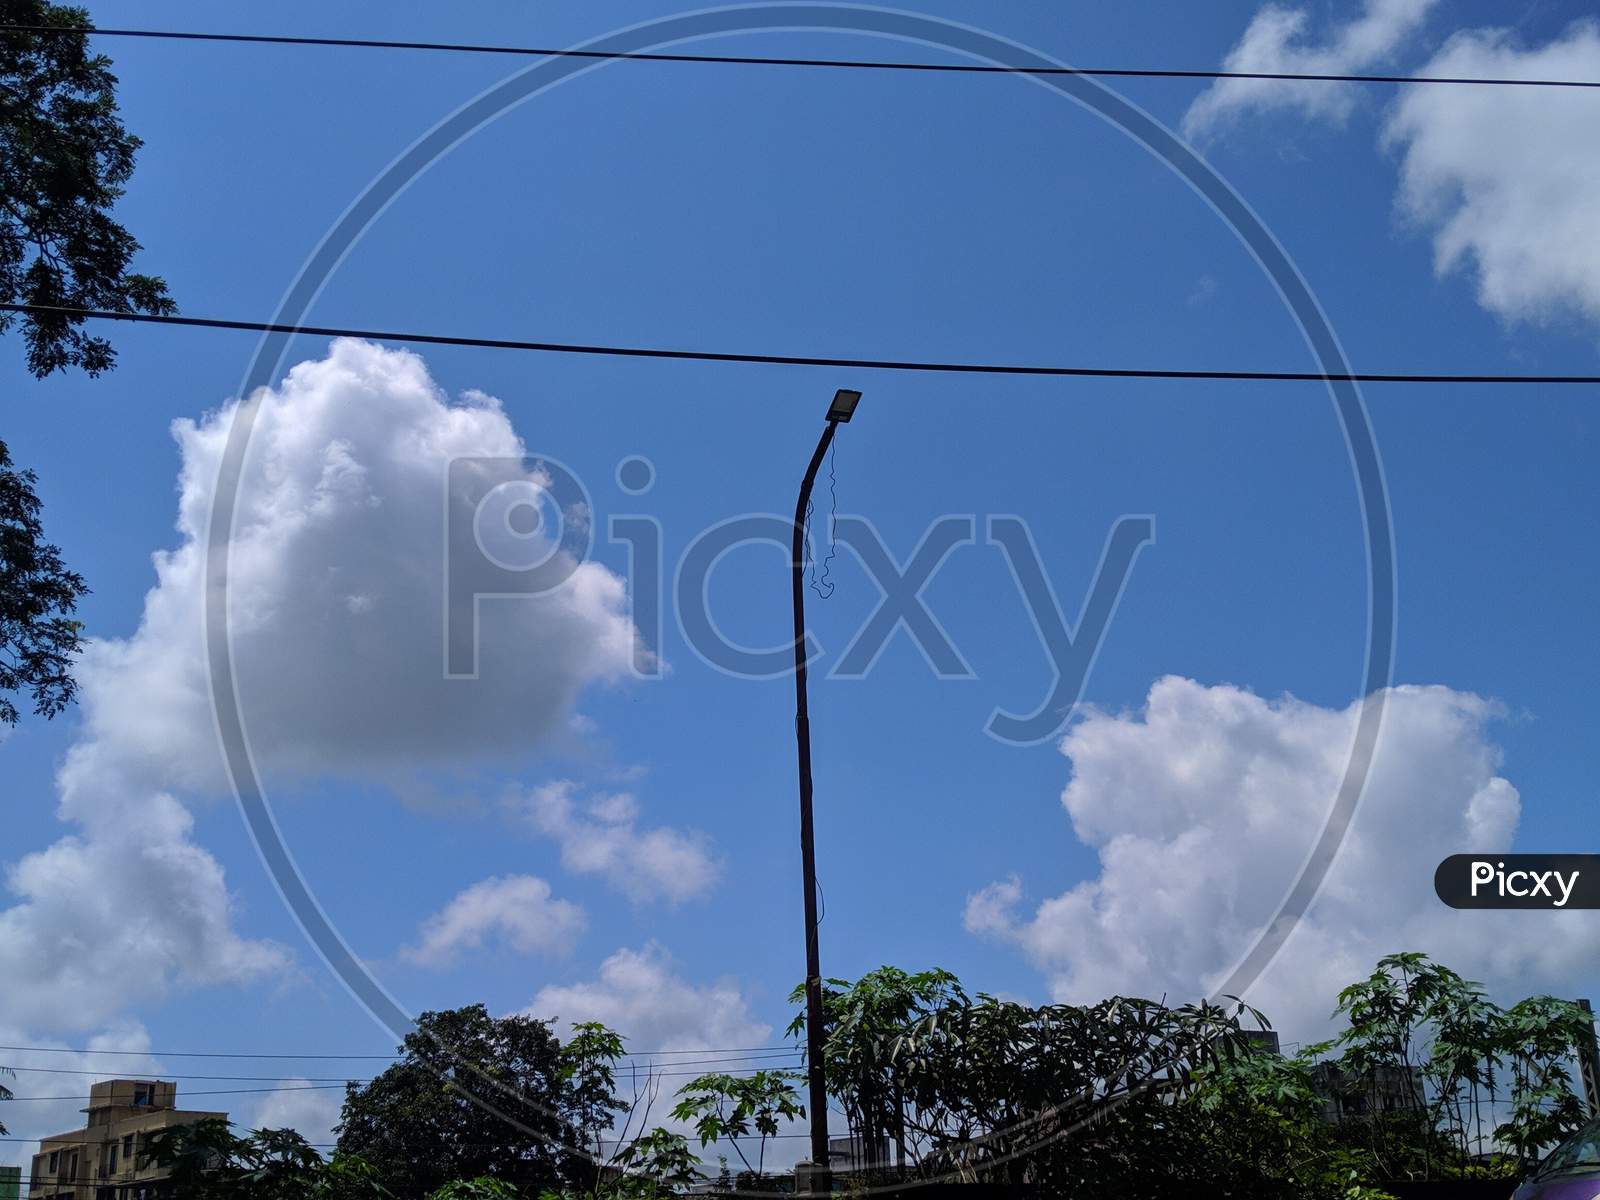 Potrait photography of white clouds and blue sky